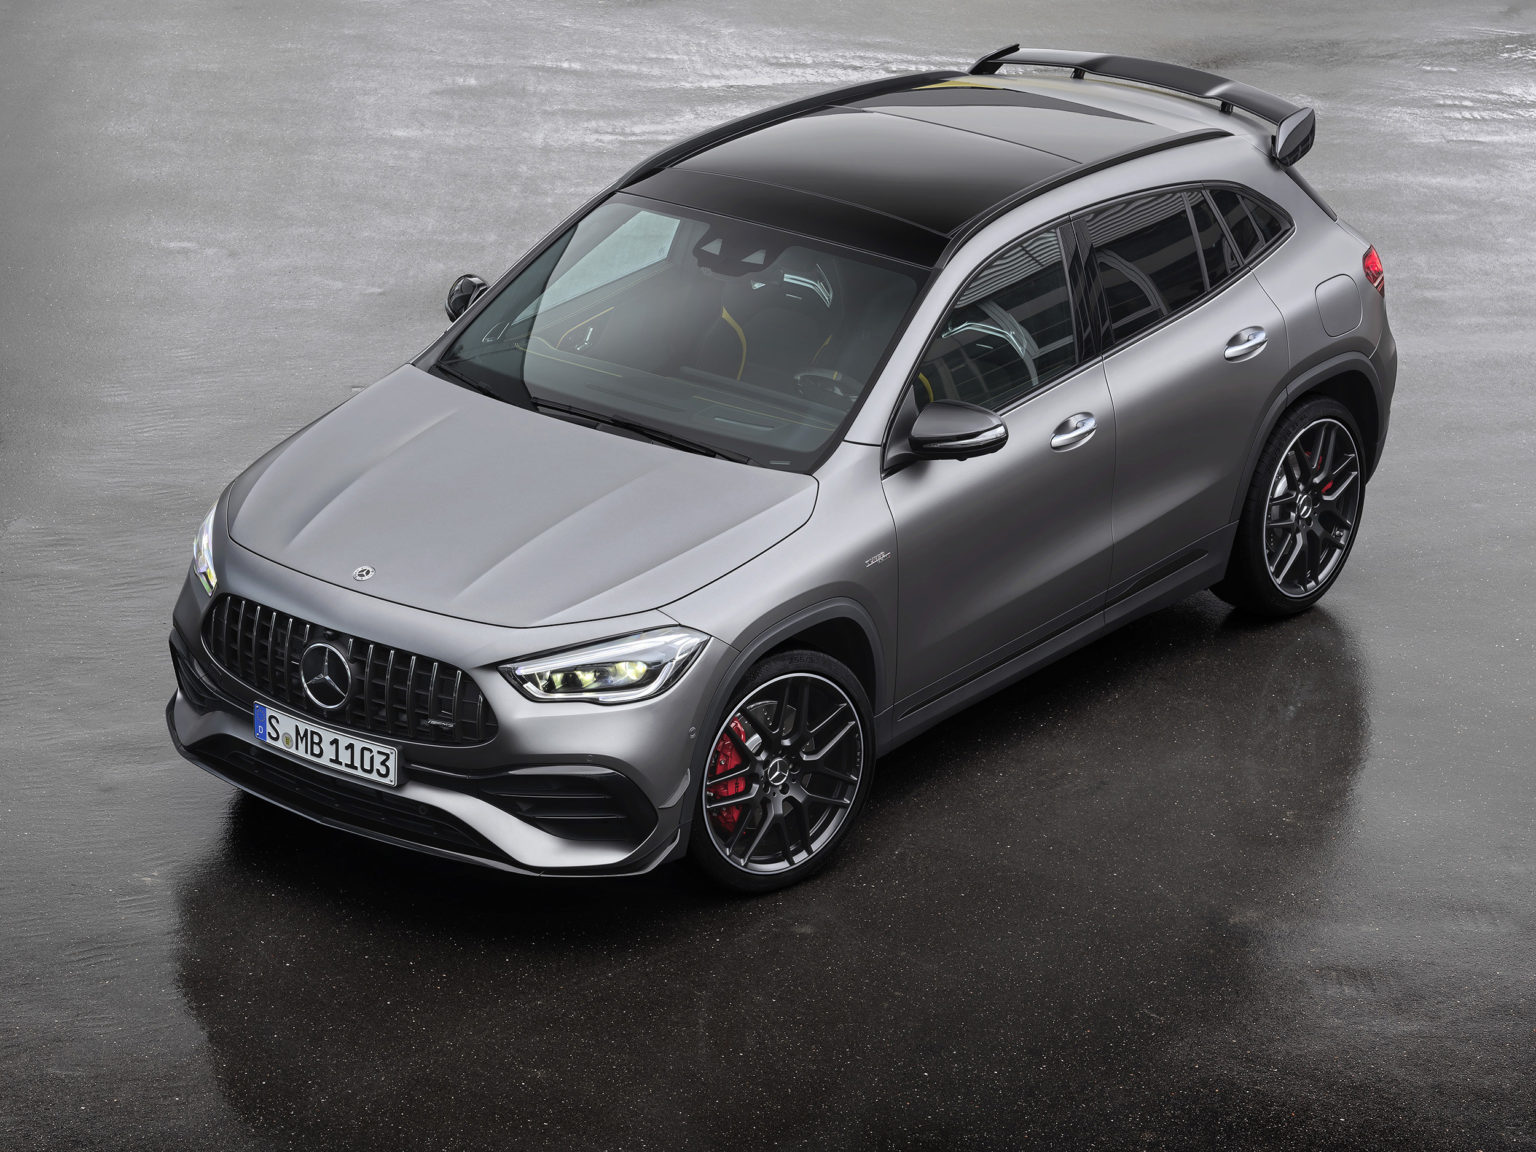 The sportier and flashier Mercedes-AMG GLA 45 is coming later this year.